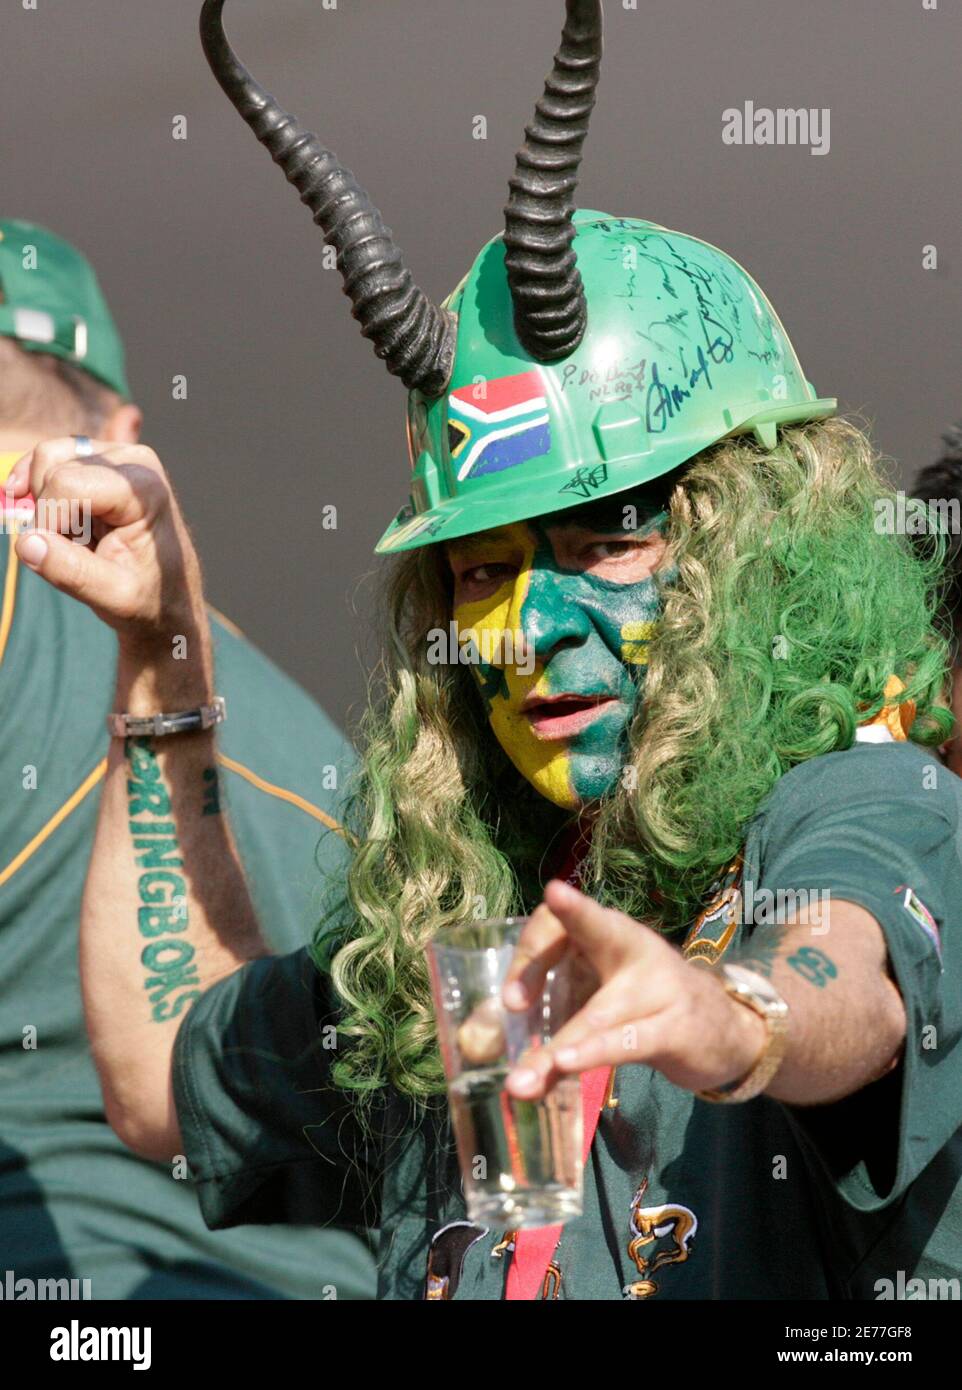 Springbok Rugby Fans High Resolution Stock Photography and Images - Alamy